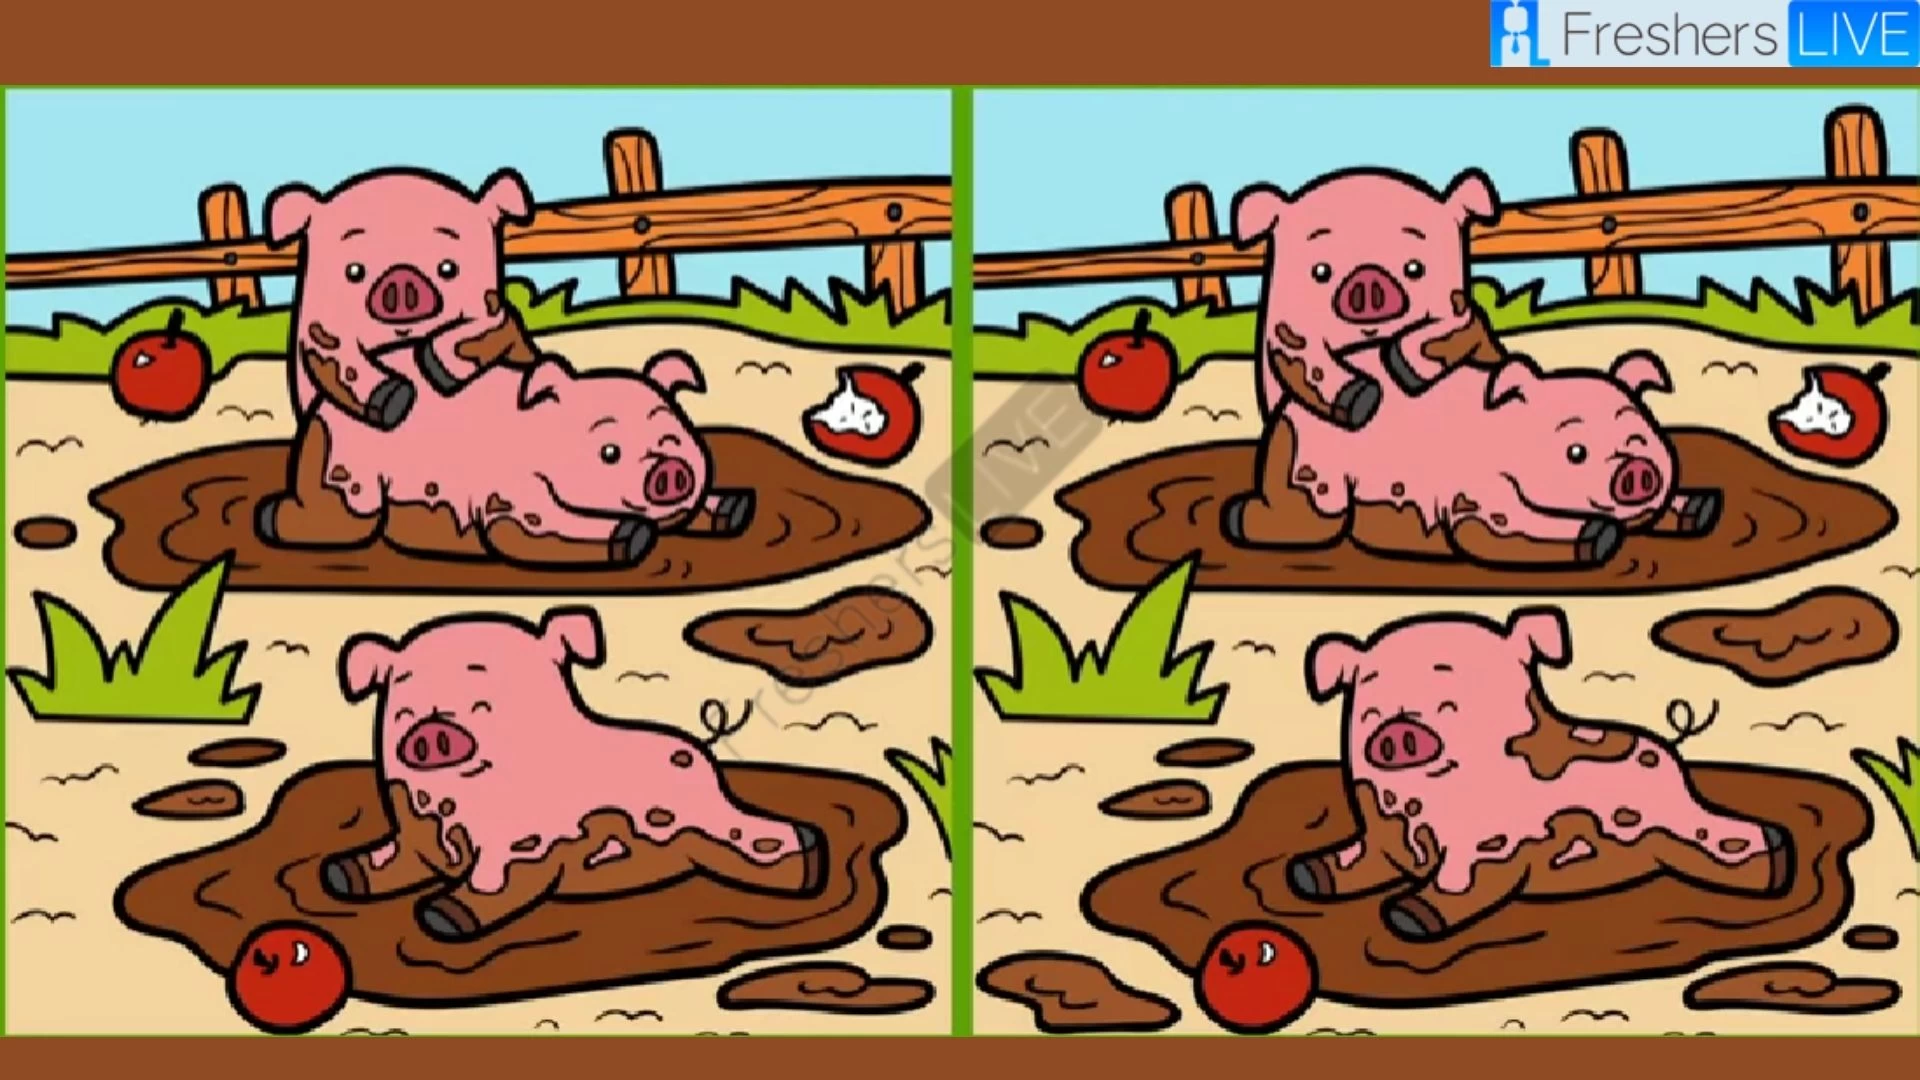 Only Extra Sharp Eyes can spot the 3 differences in the Pig picture within 12 seconds